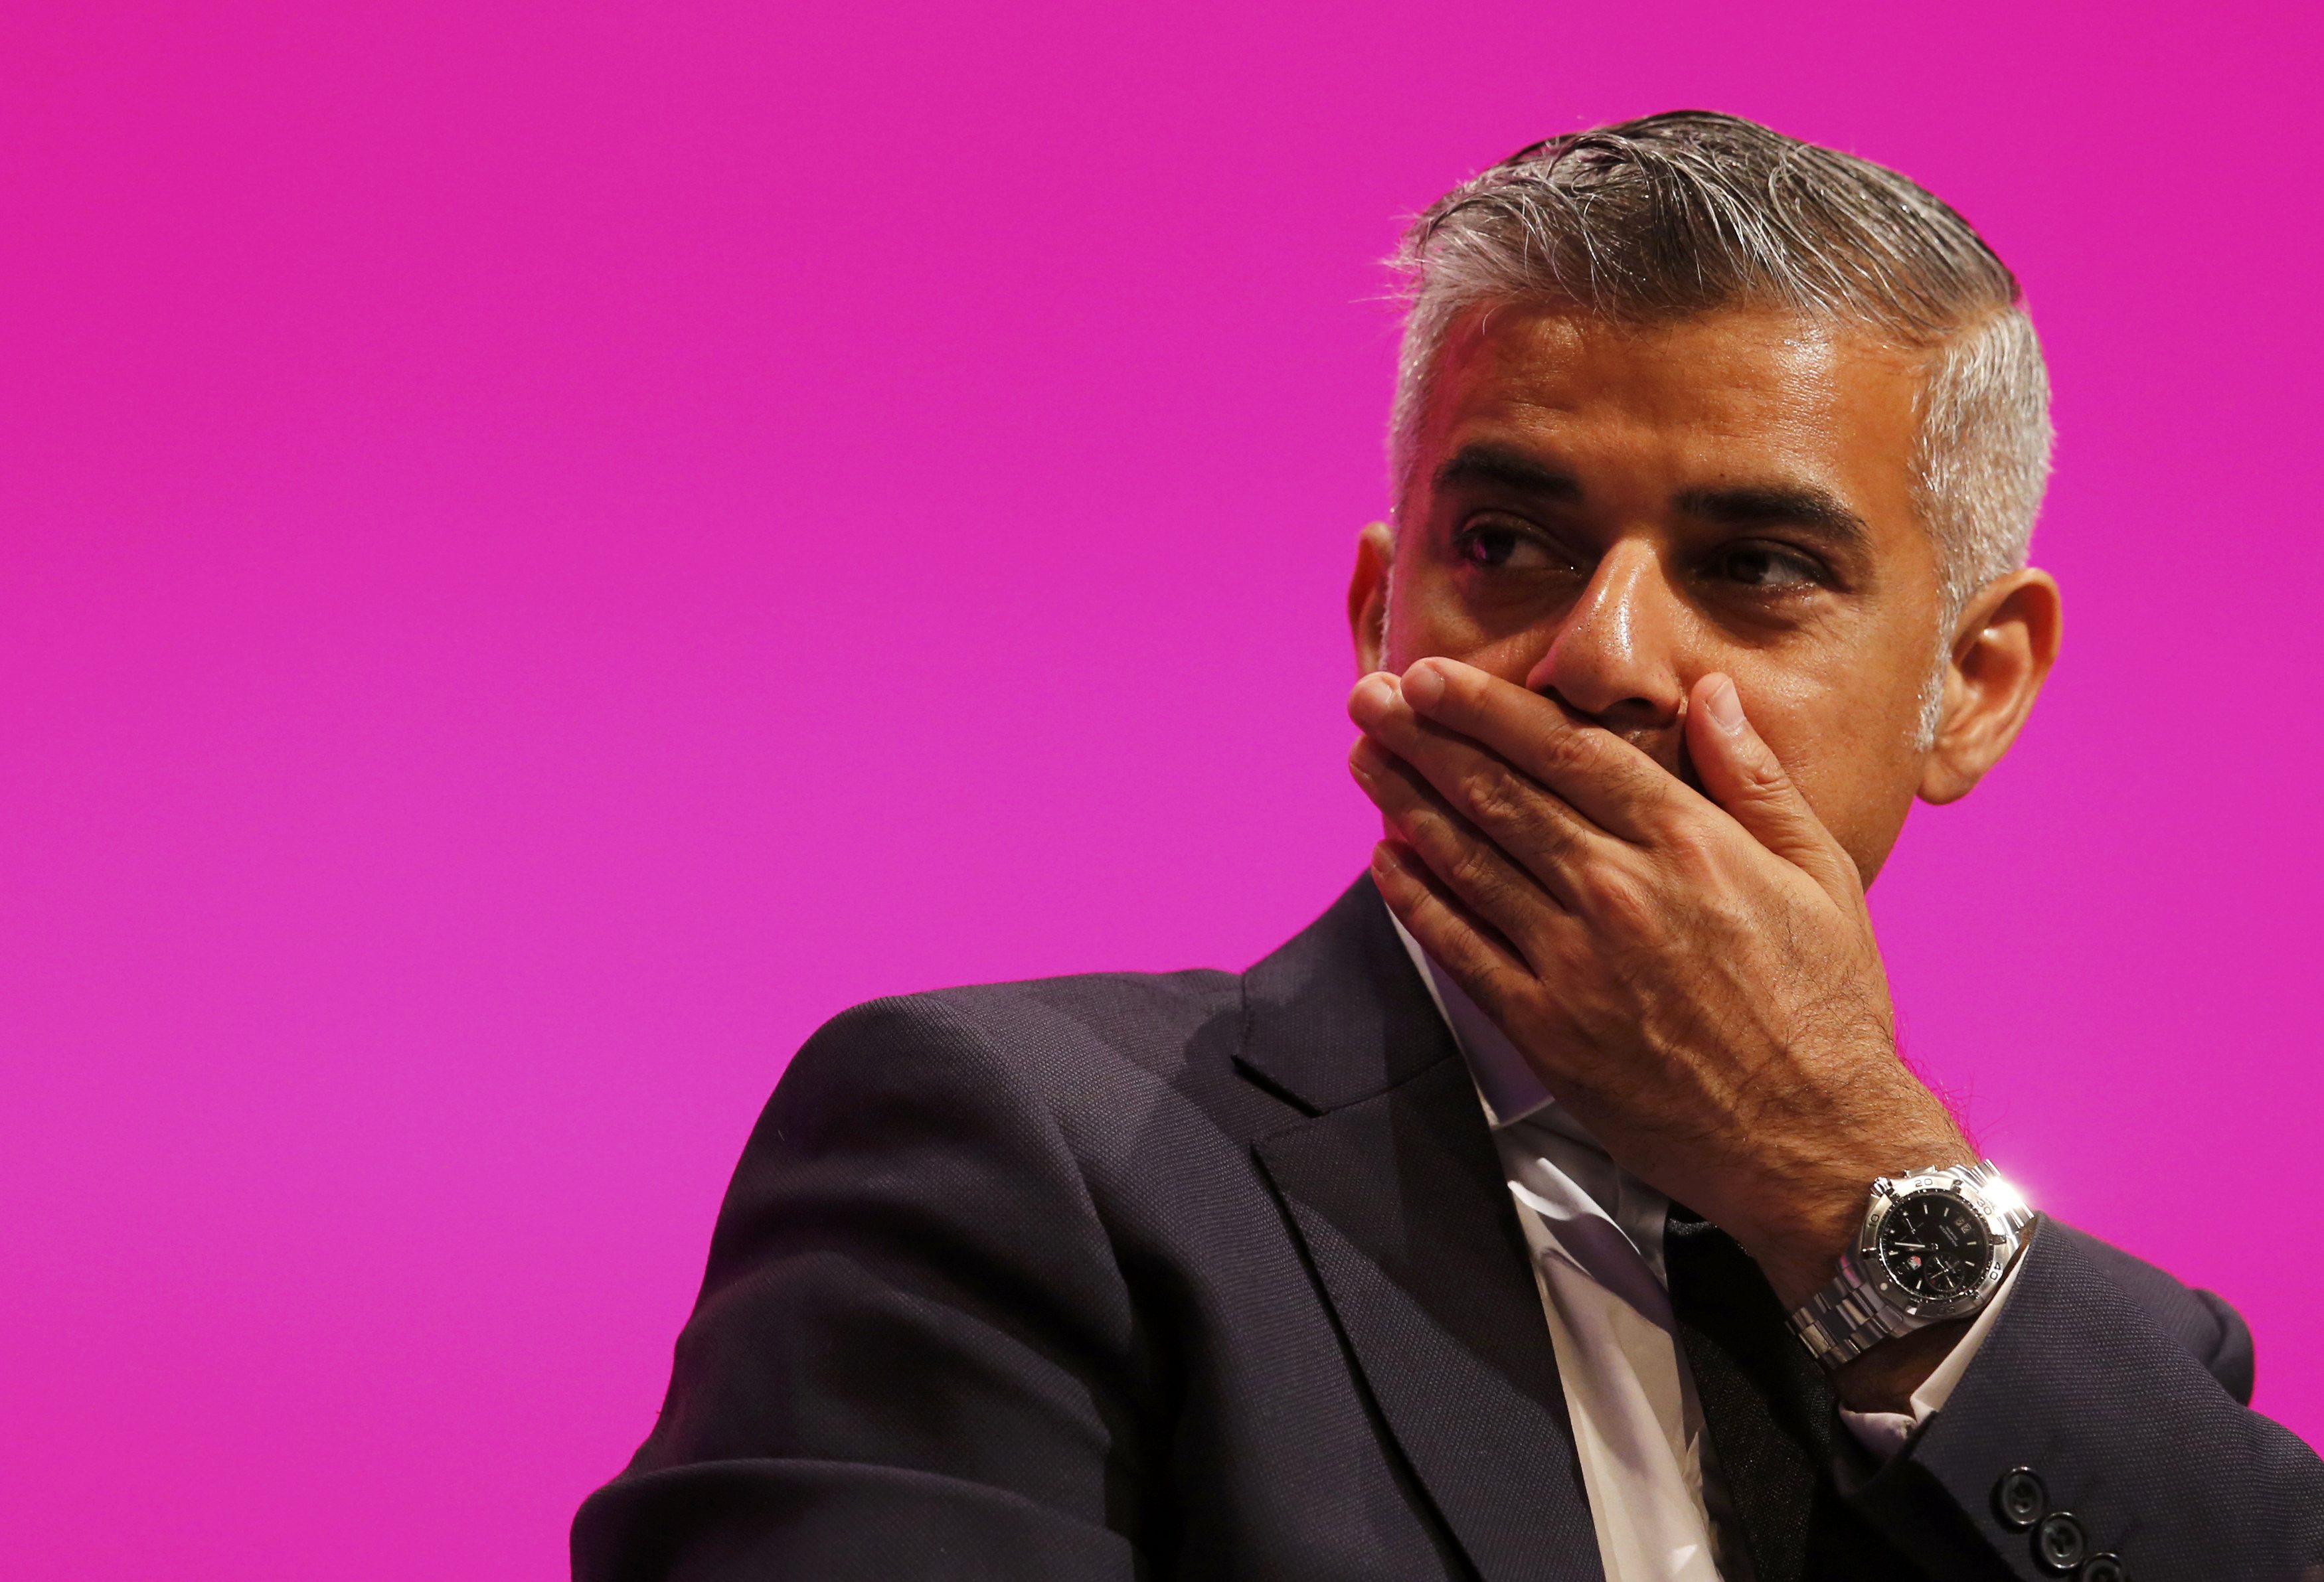 Shadow Justice minister Sadiq Khan, reacts as he listens to Yvette Cooper, Britain's opposition Labour Party's shadow home secretary speaks at the party's conference in Manchester